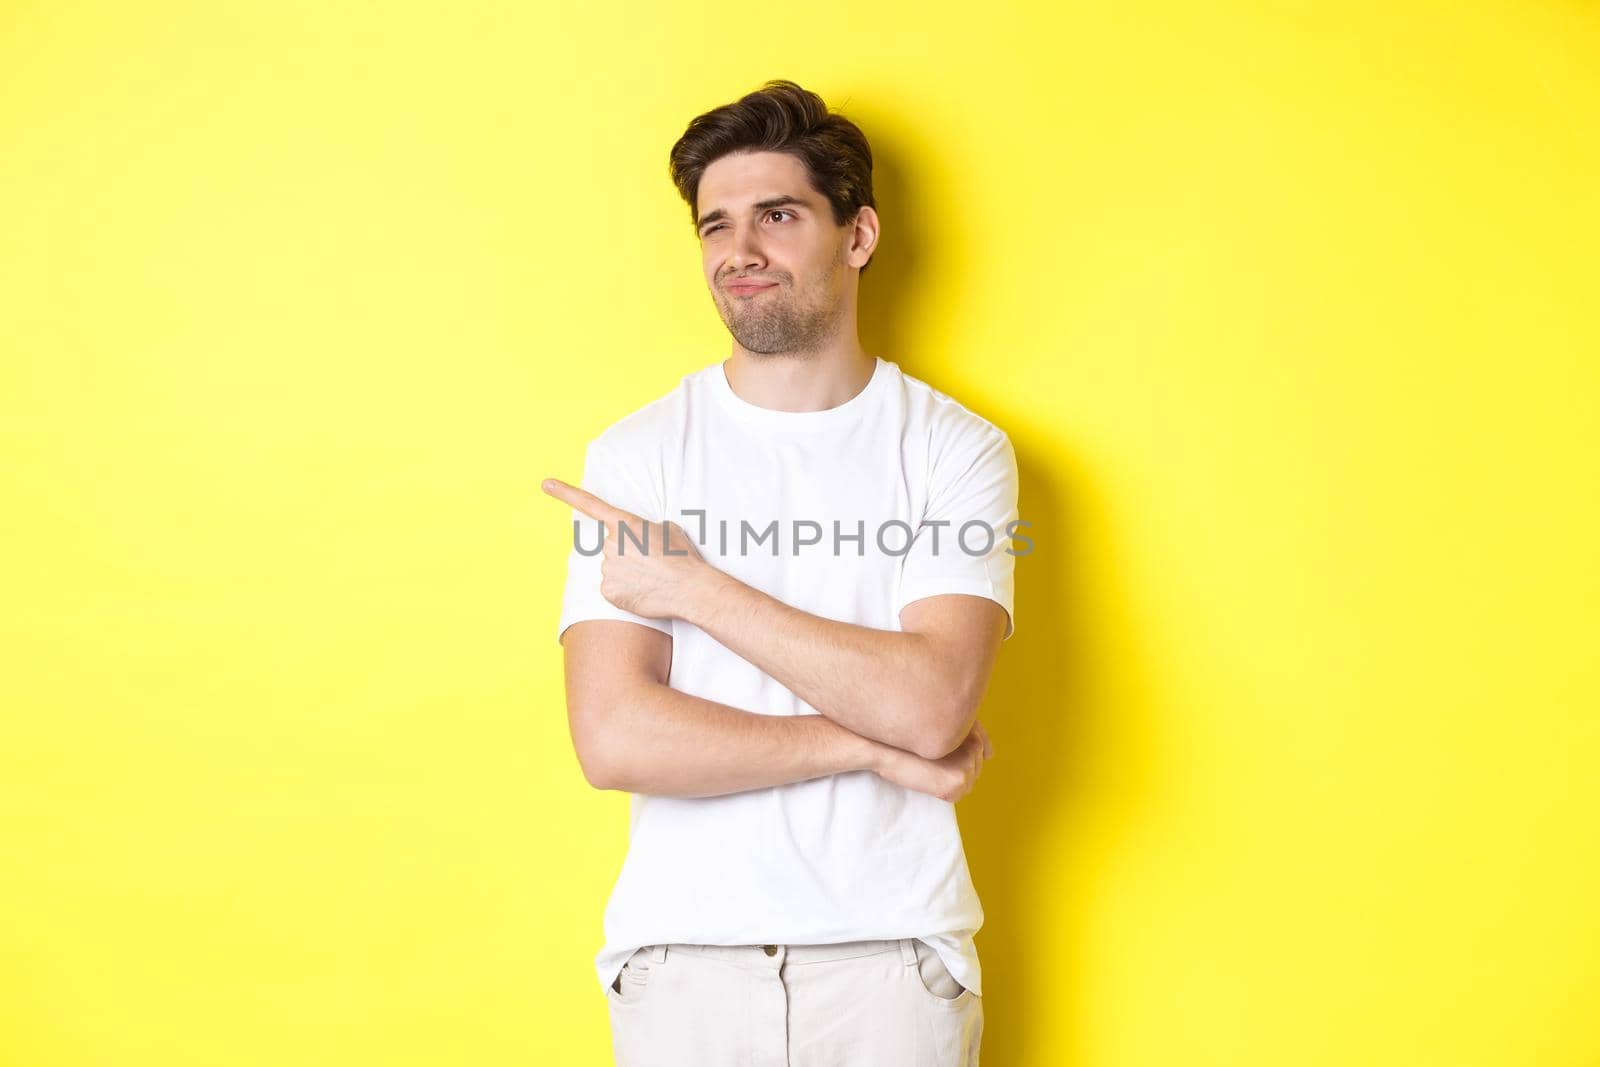 Unimpressed young man complaining, pointing and looking with skeptical face at bad product, standing against yellow background.